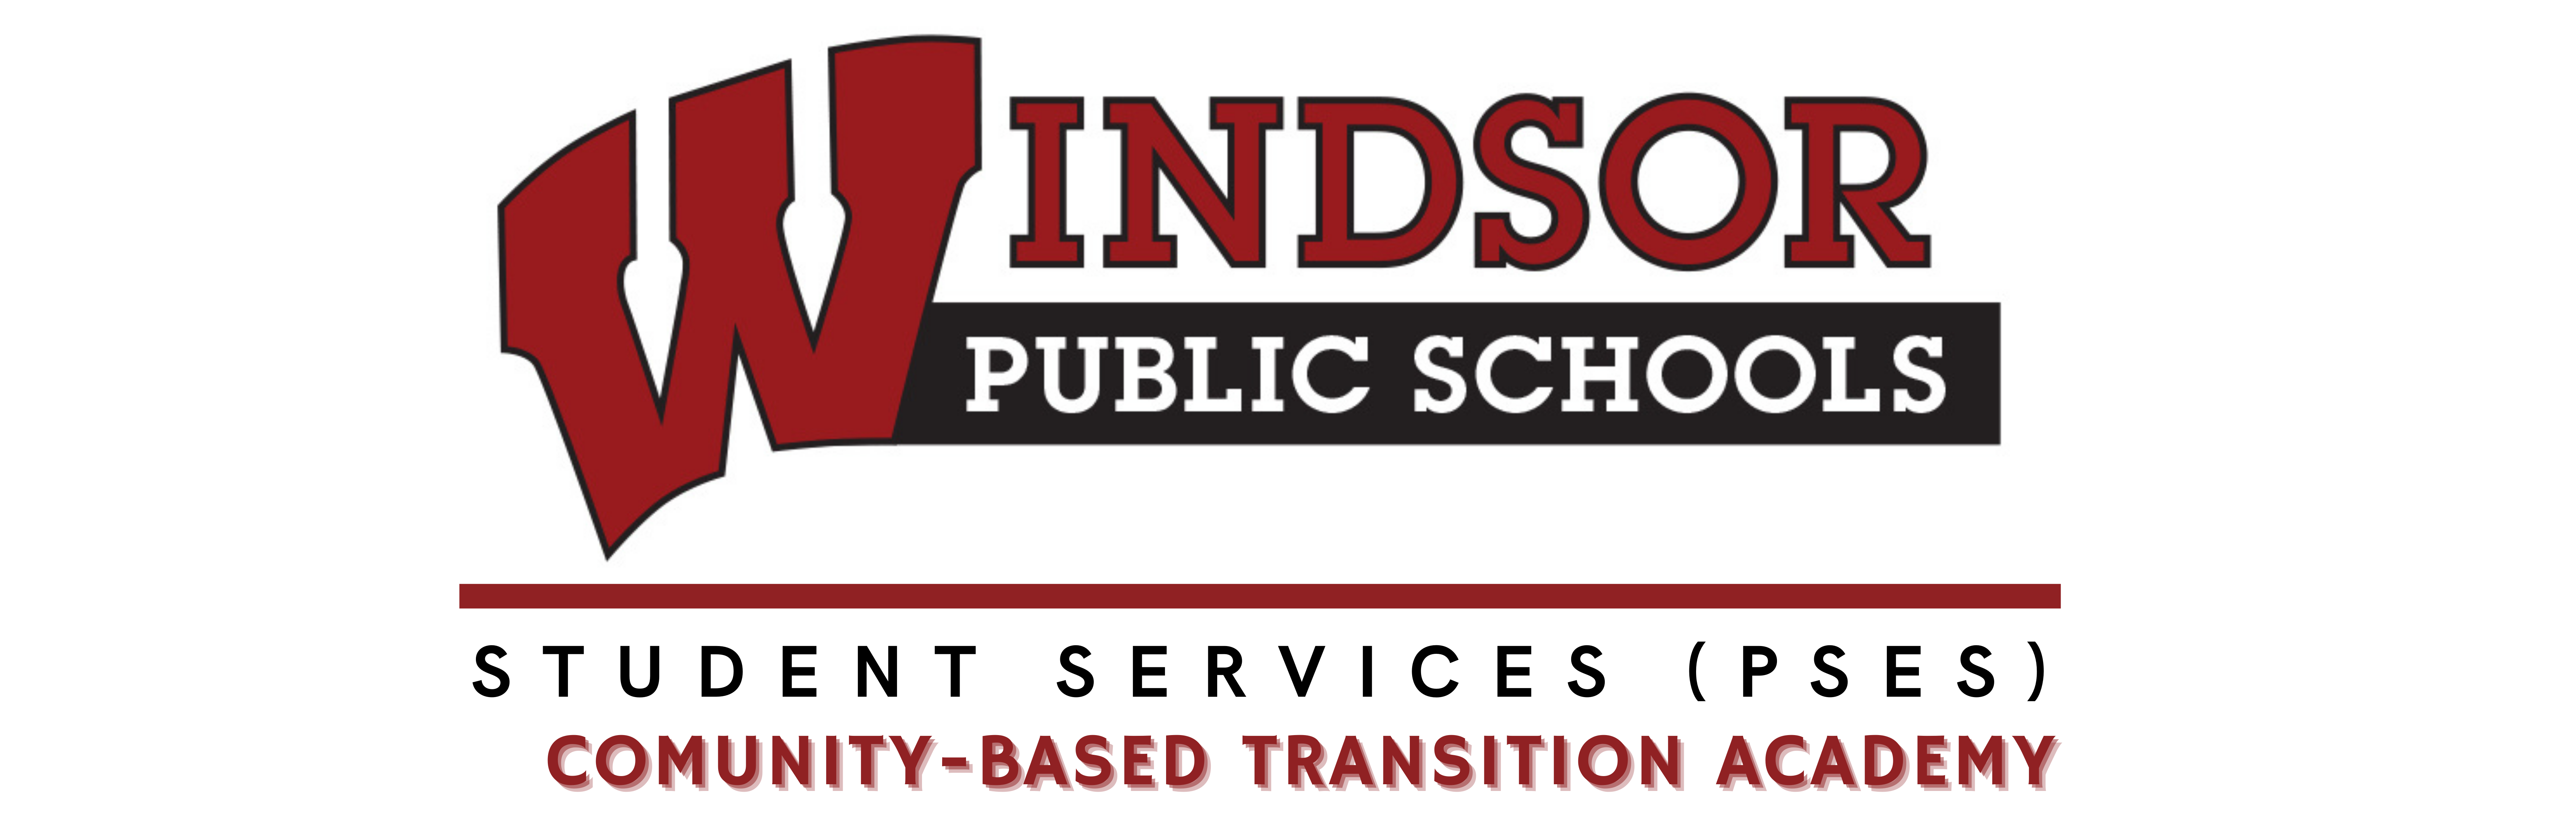 WPS Logo Student Services PSES Community Based Transition Academy